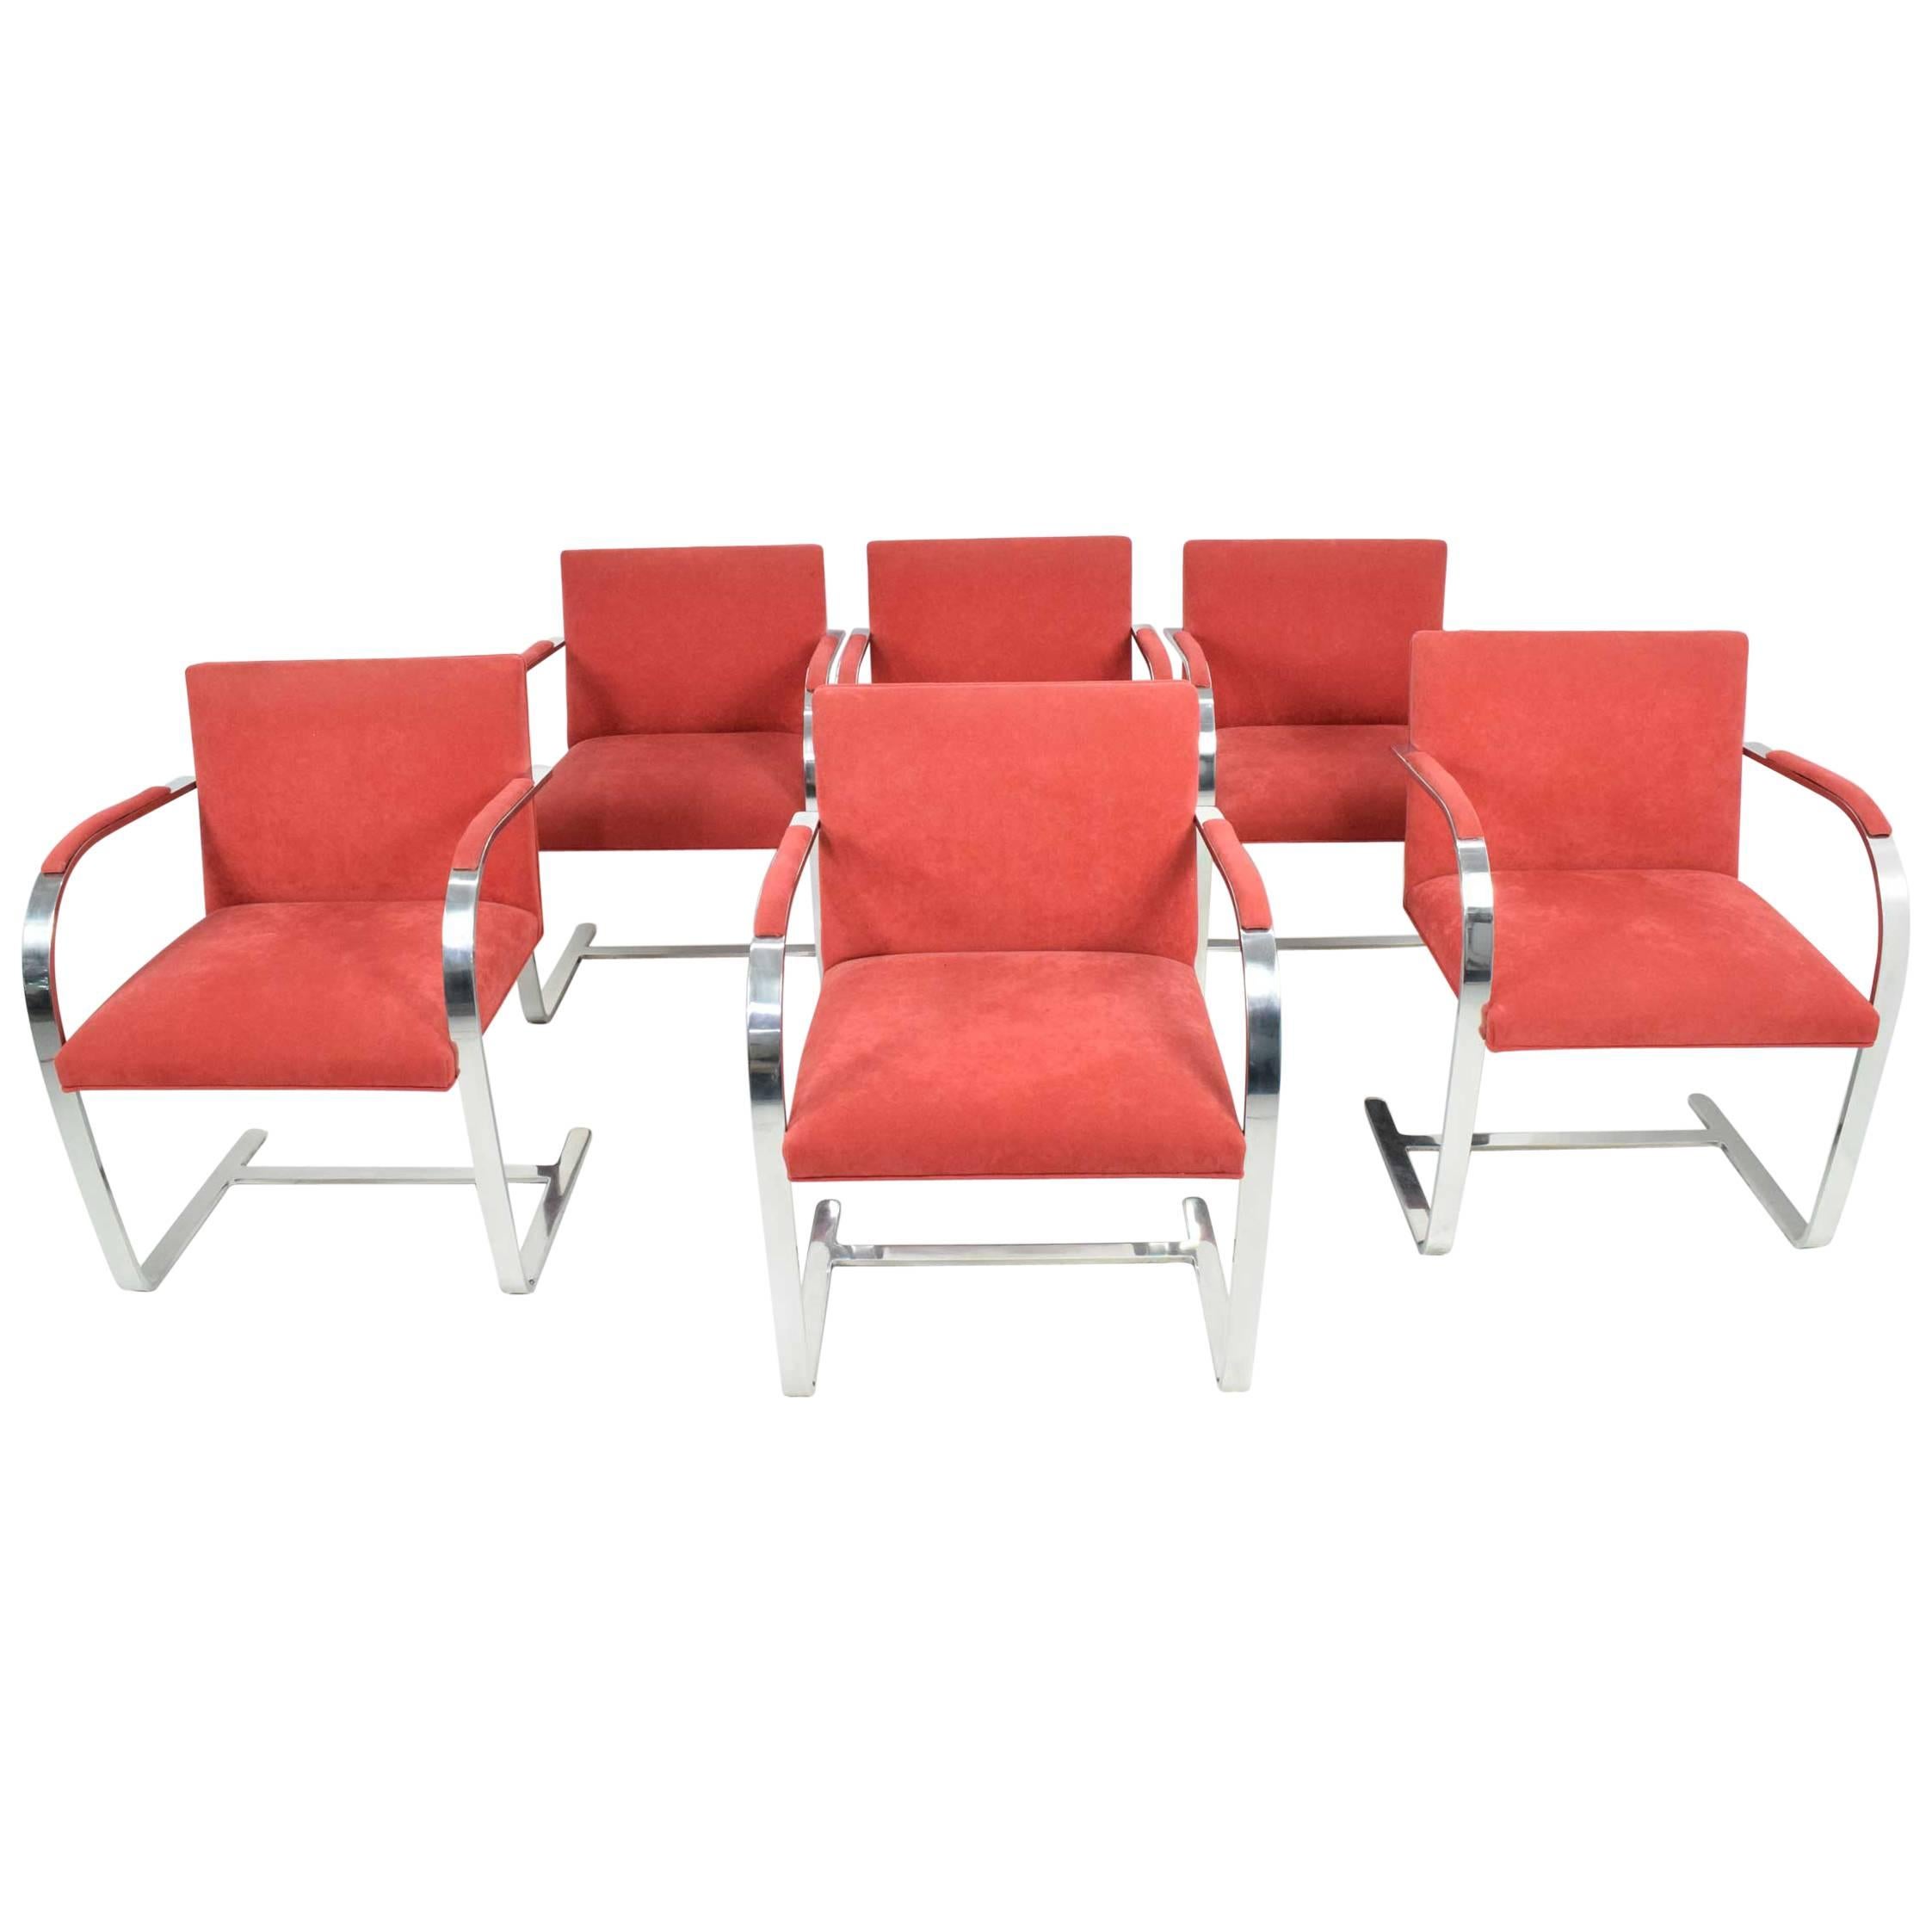 Faltbar Stainless Steel Brno Chairs by Knoll